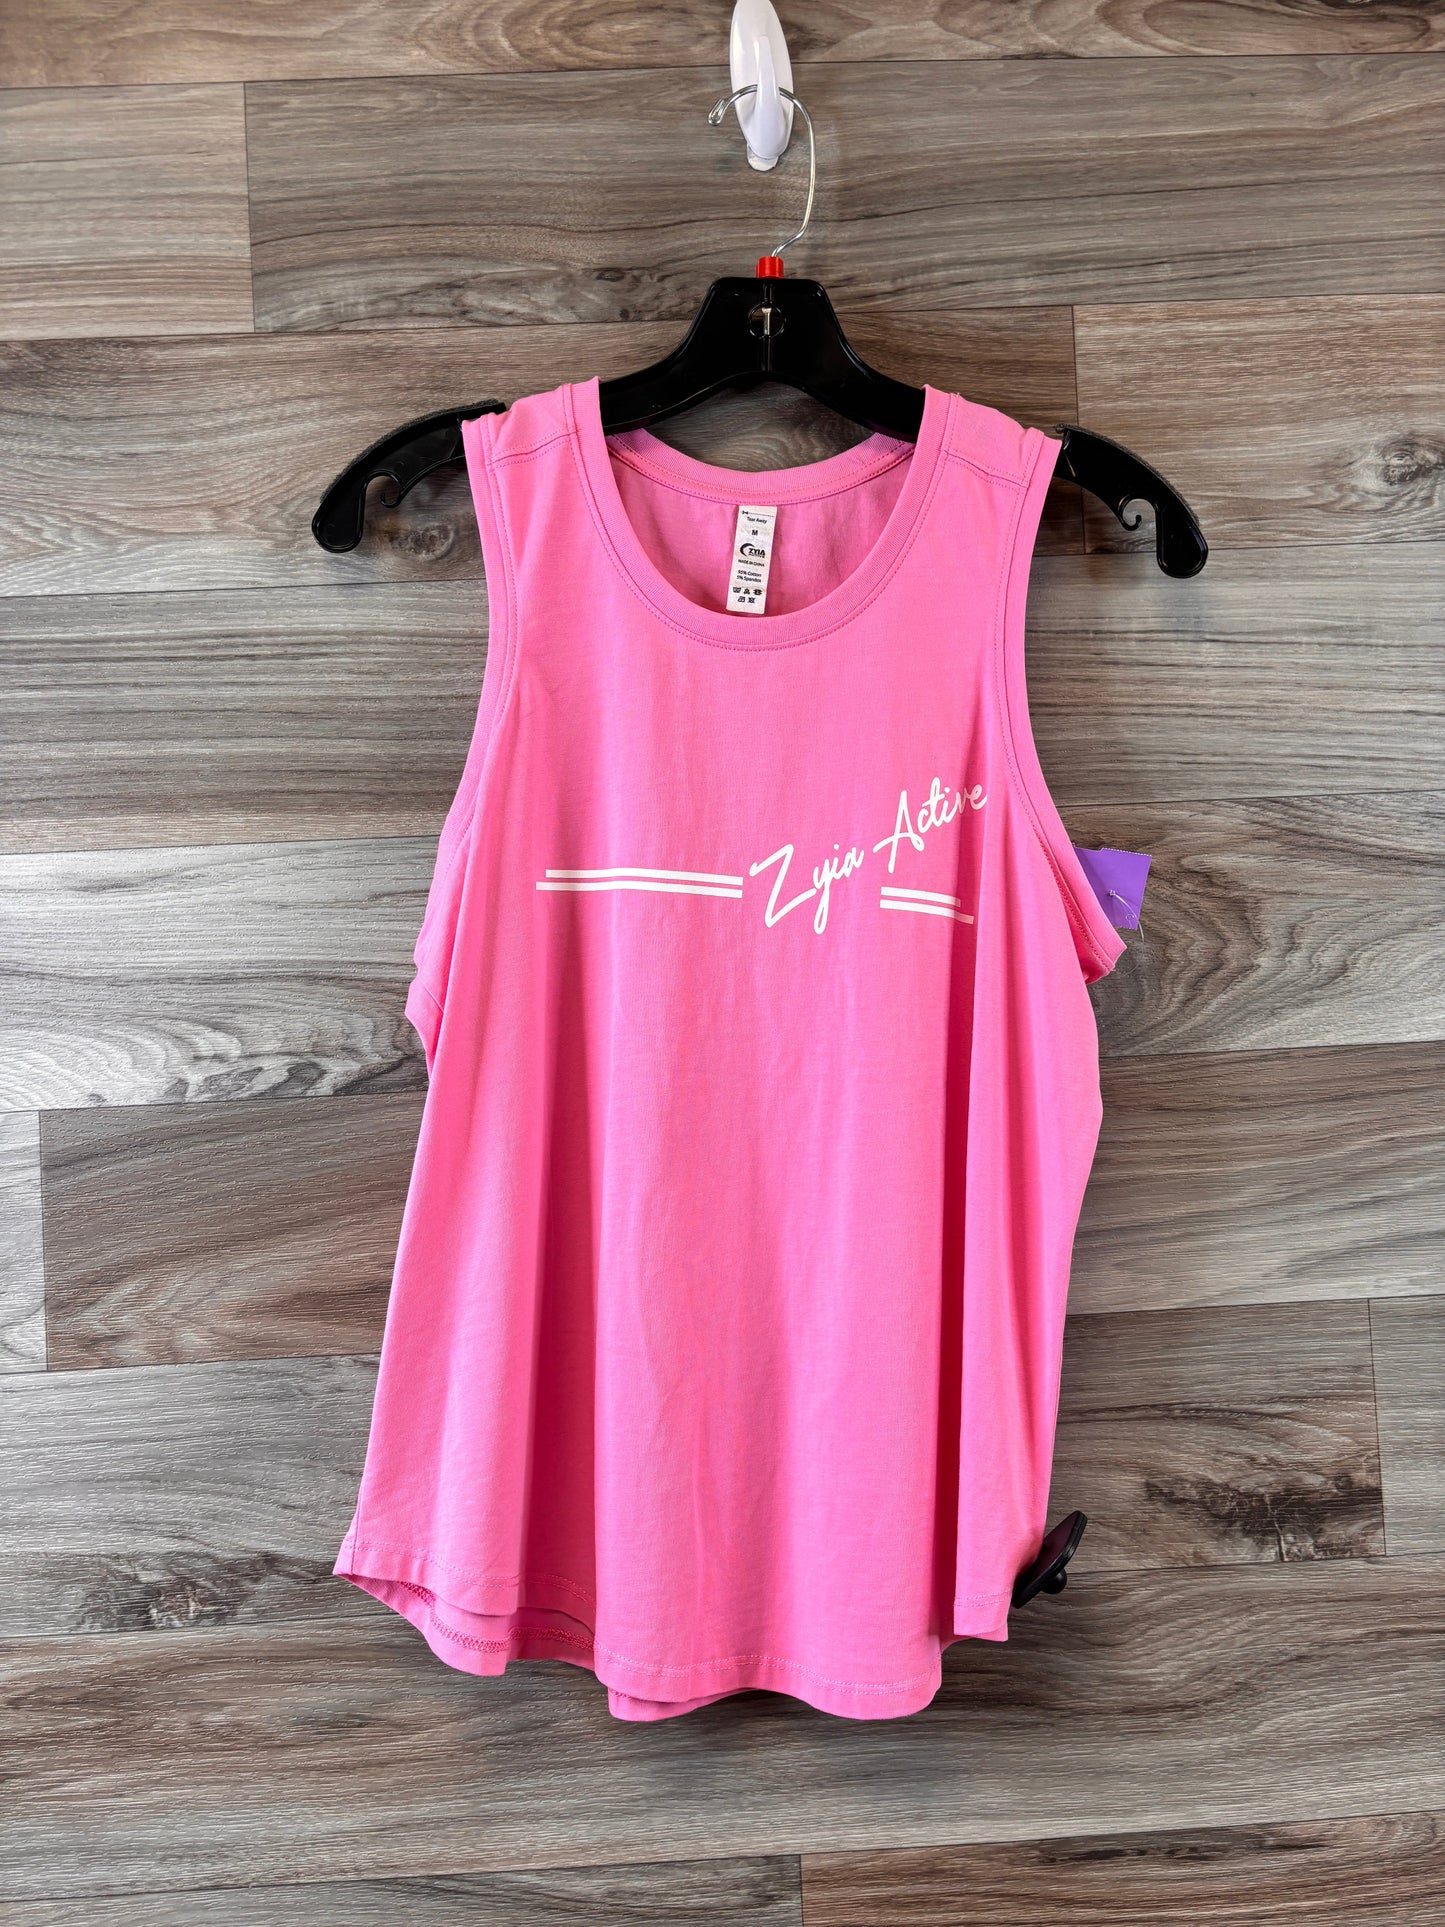 Pink & White Athletic Tank Top Zyia, Size M